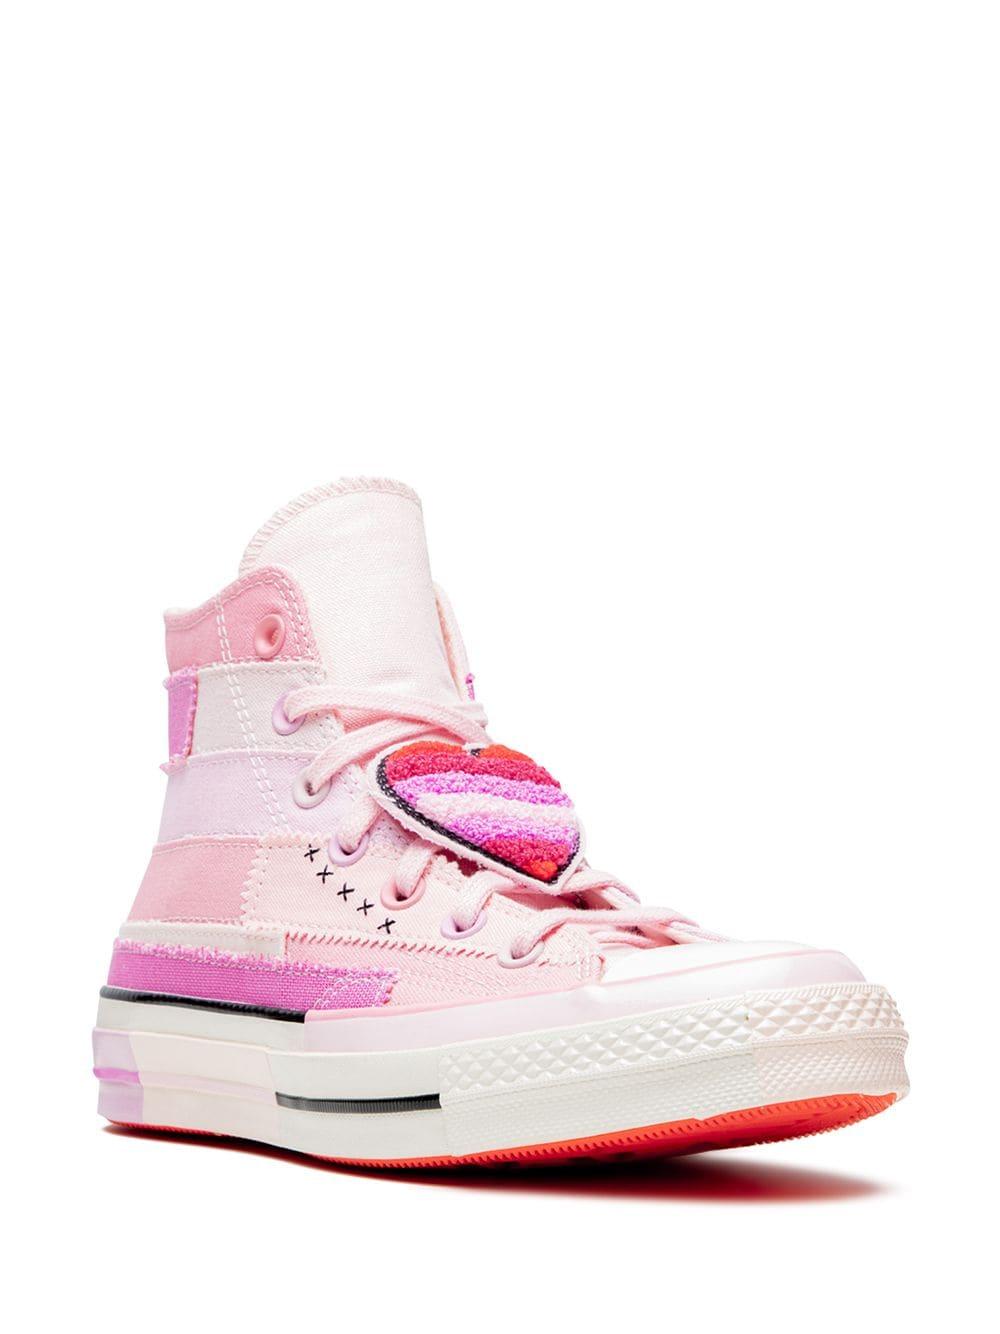 Converse X Millie Bobby Brown Chuck 70 Hi Petal Pink Sneakers for Men | Lyst